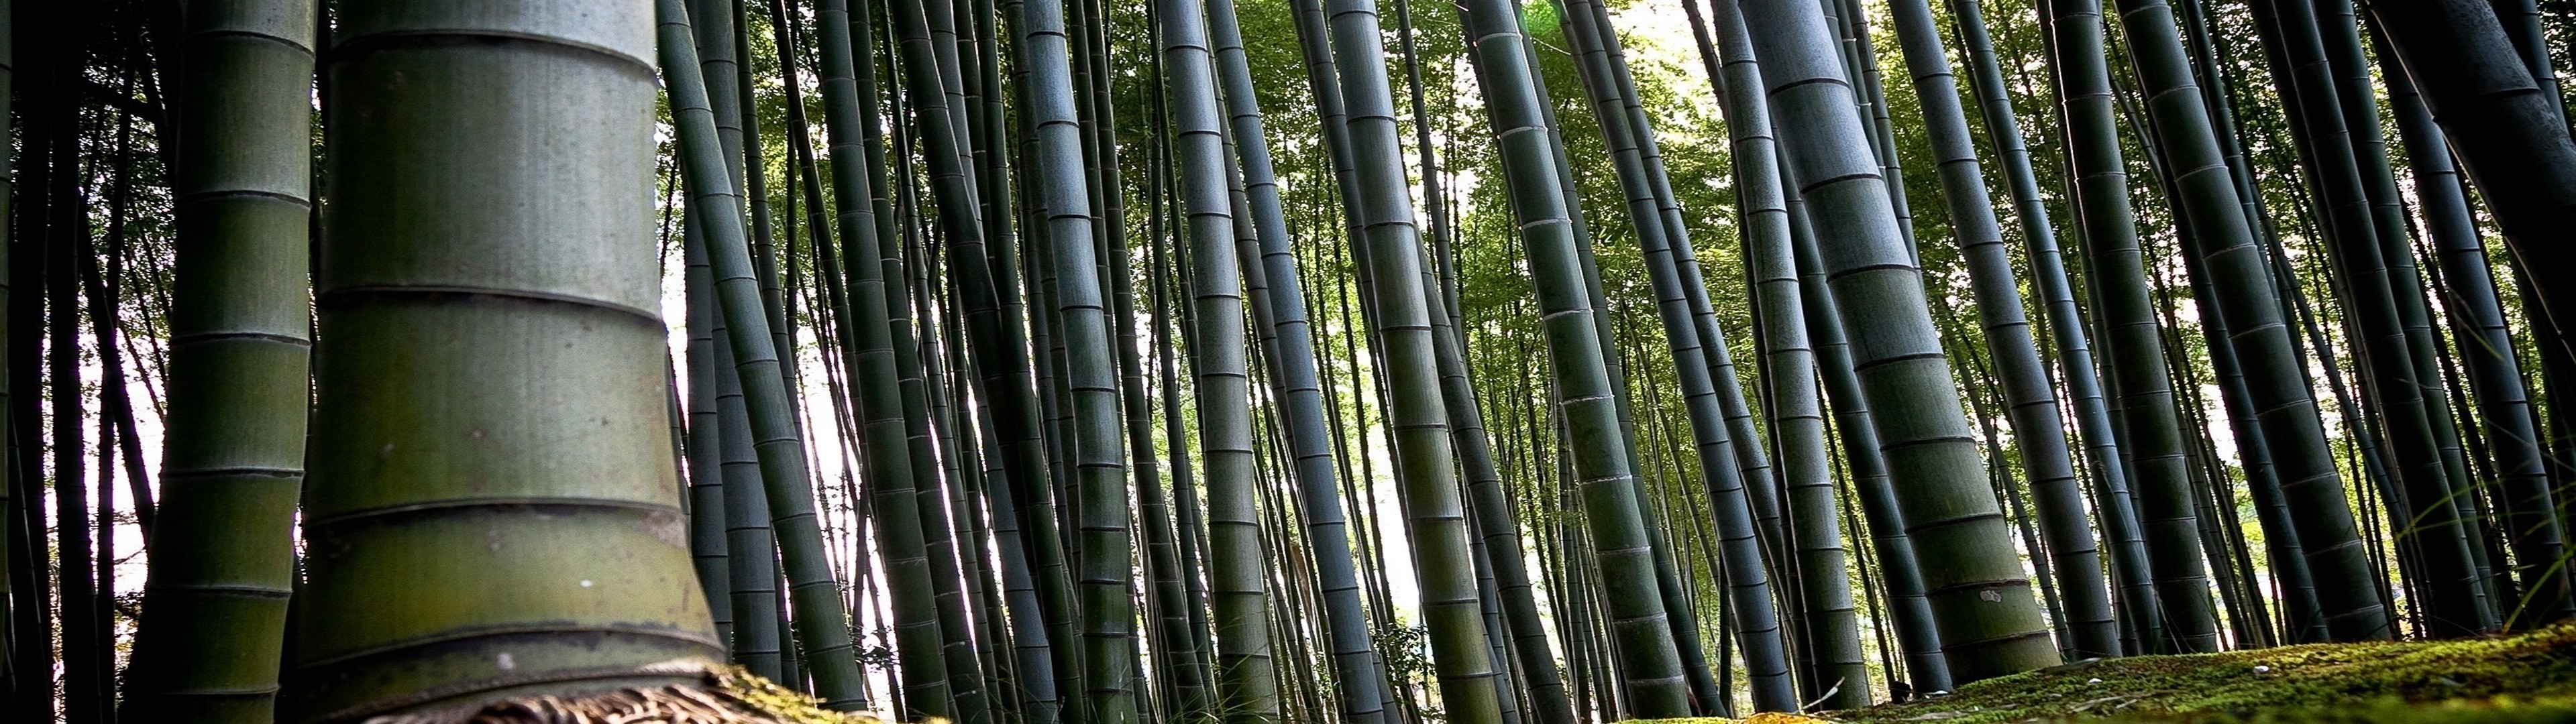 Nature Landscape Multiple Display Bamboo 3840x1080